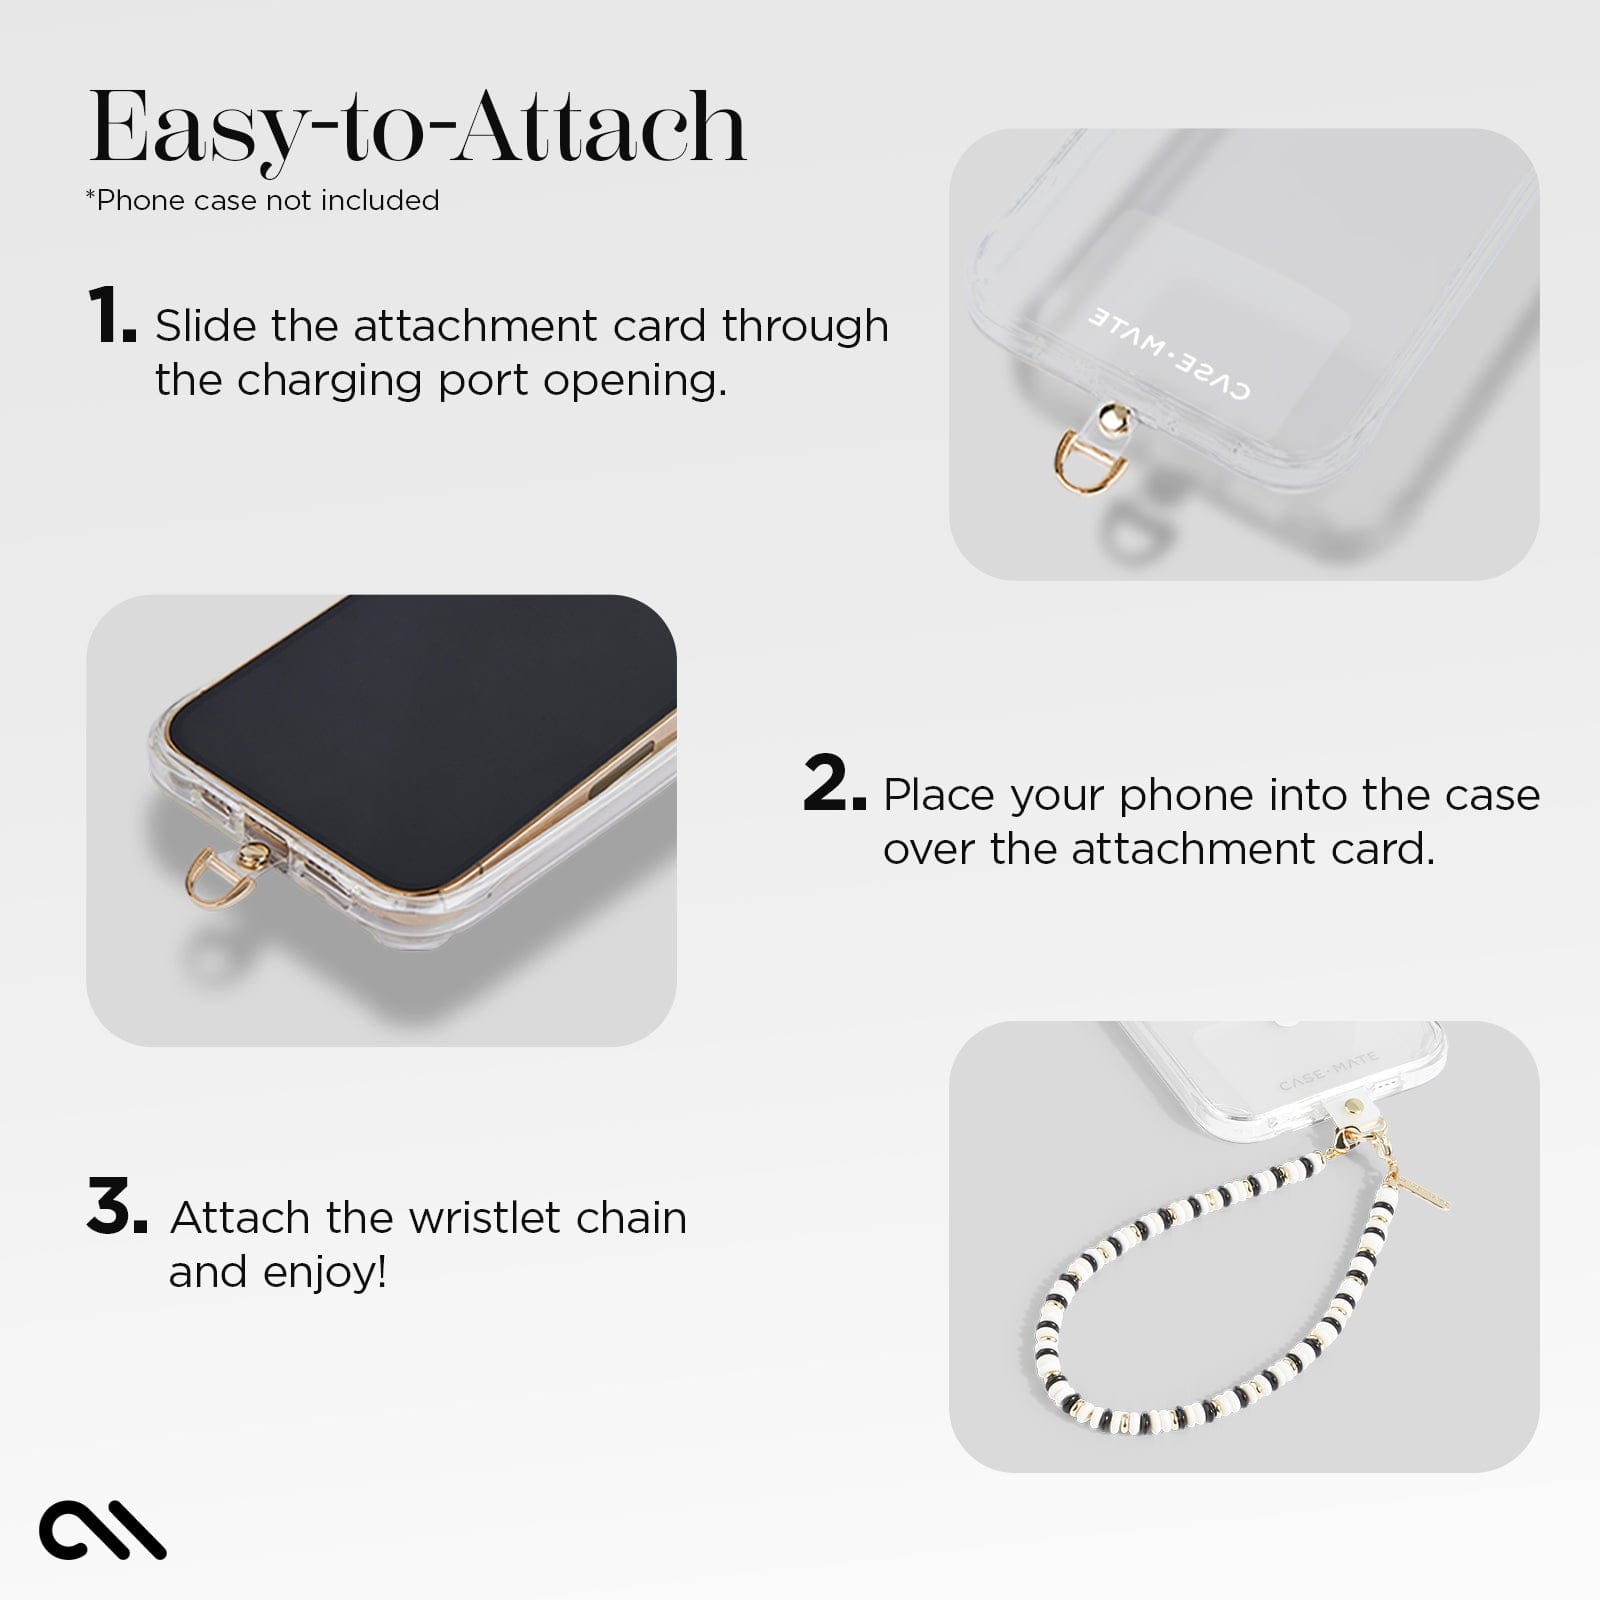 EASY-TO-ATTACH. 1. SLIDE THE ATTACHMENT CARD THROUGH THE CHARGING PORT OPENING. 2. PLACE YOUR PHONE INTO THE CASE OVER THE ATTACHMENT CARD. 3. ATTACH THE WRISTLET CHAIN AND ENJOY!